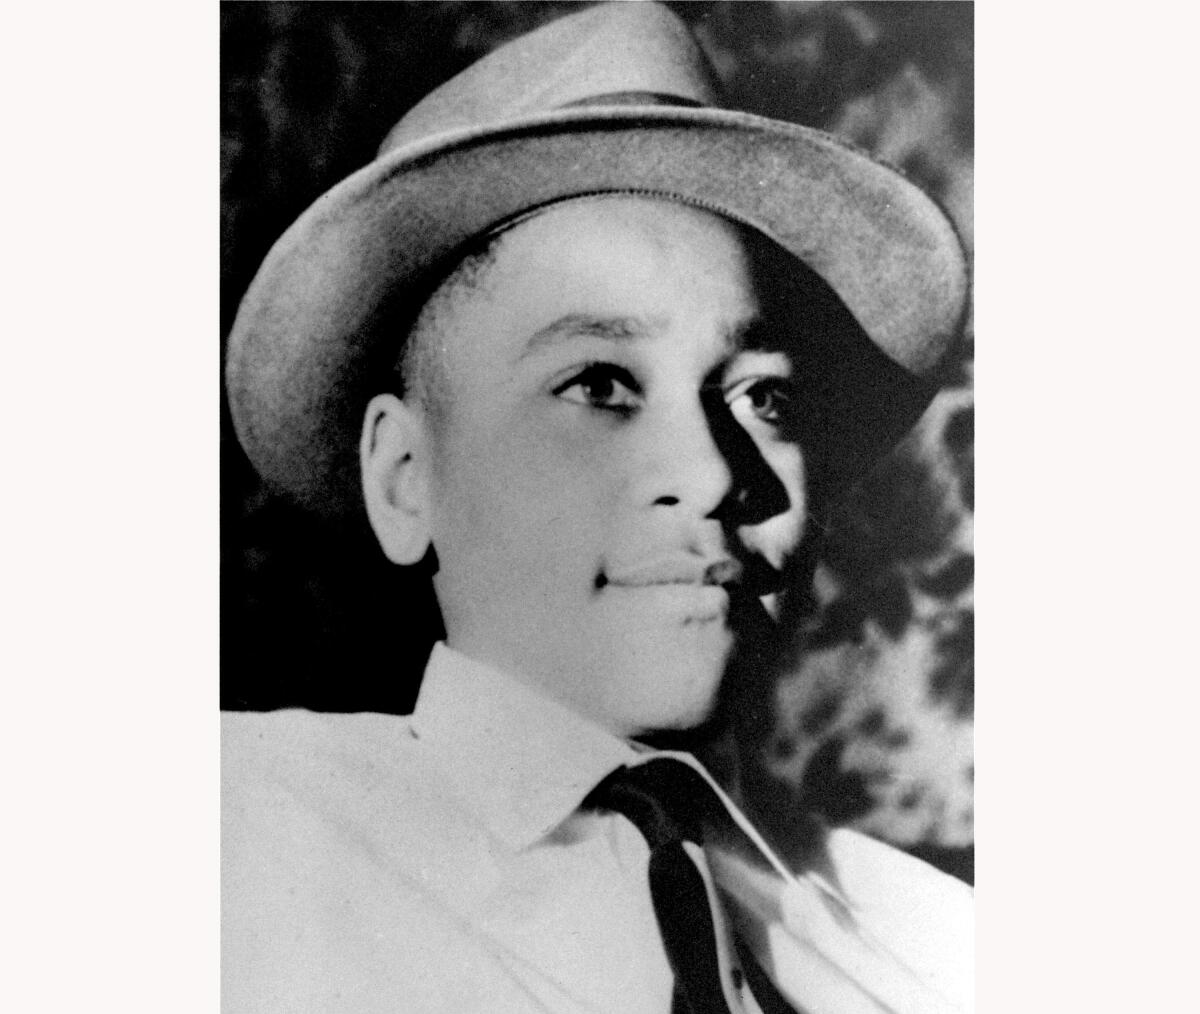 Undated photo of Emmett Louis Till, a 14-year-old boy who was kidnapped and murdered in 1955.